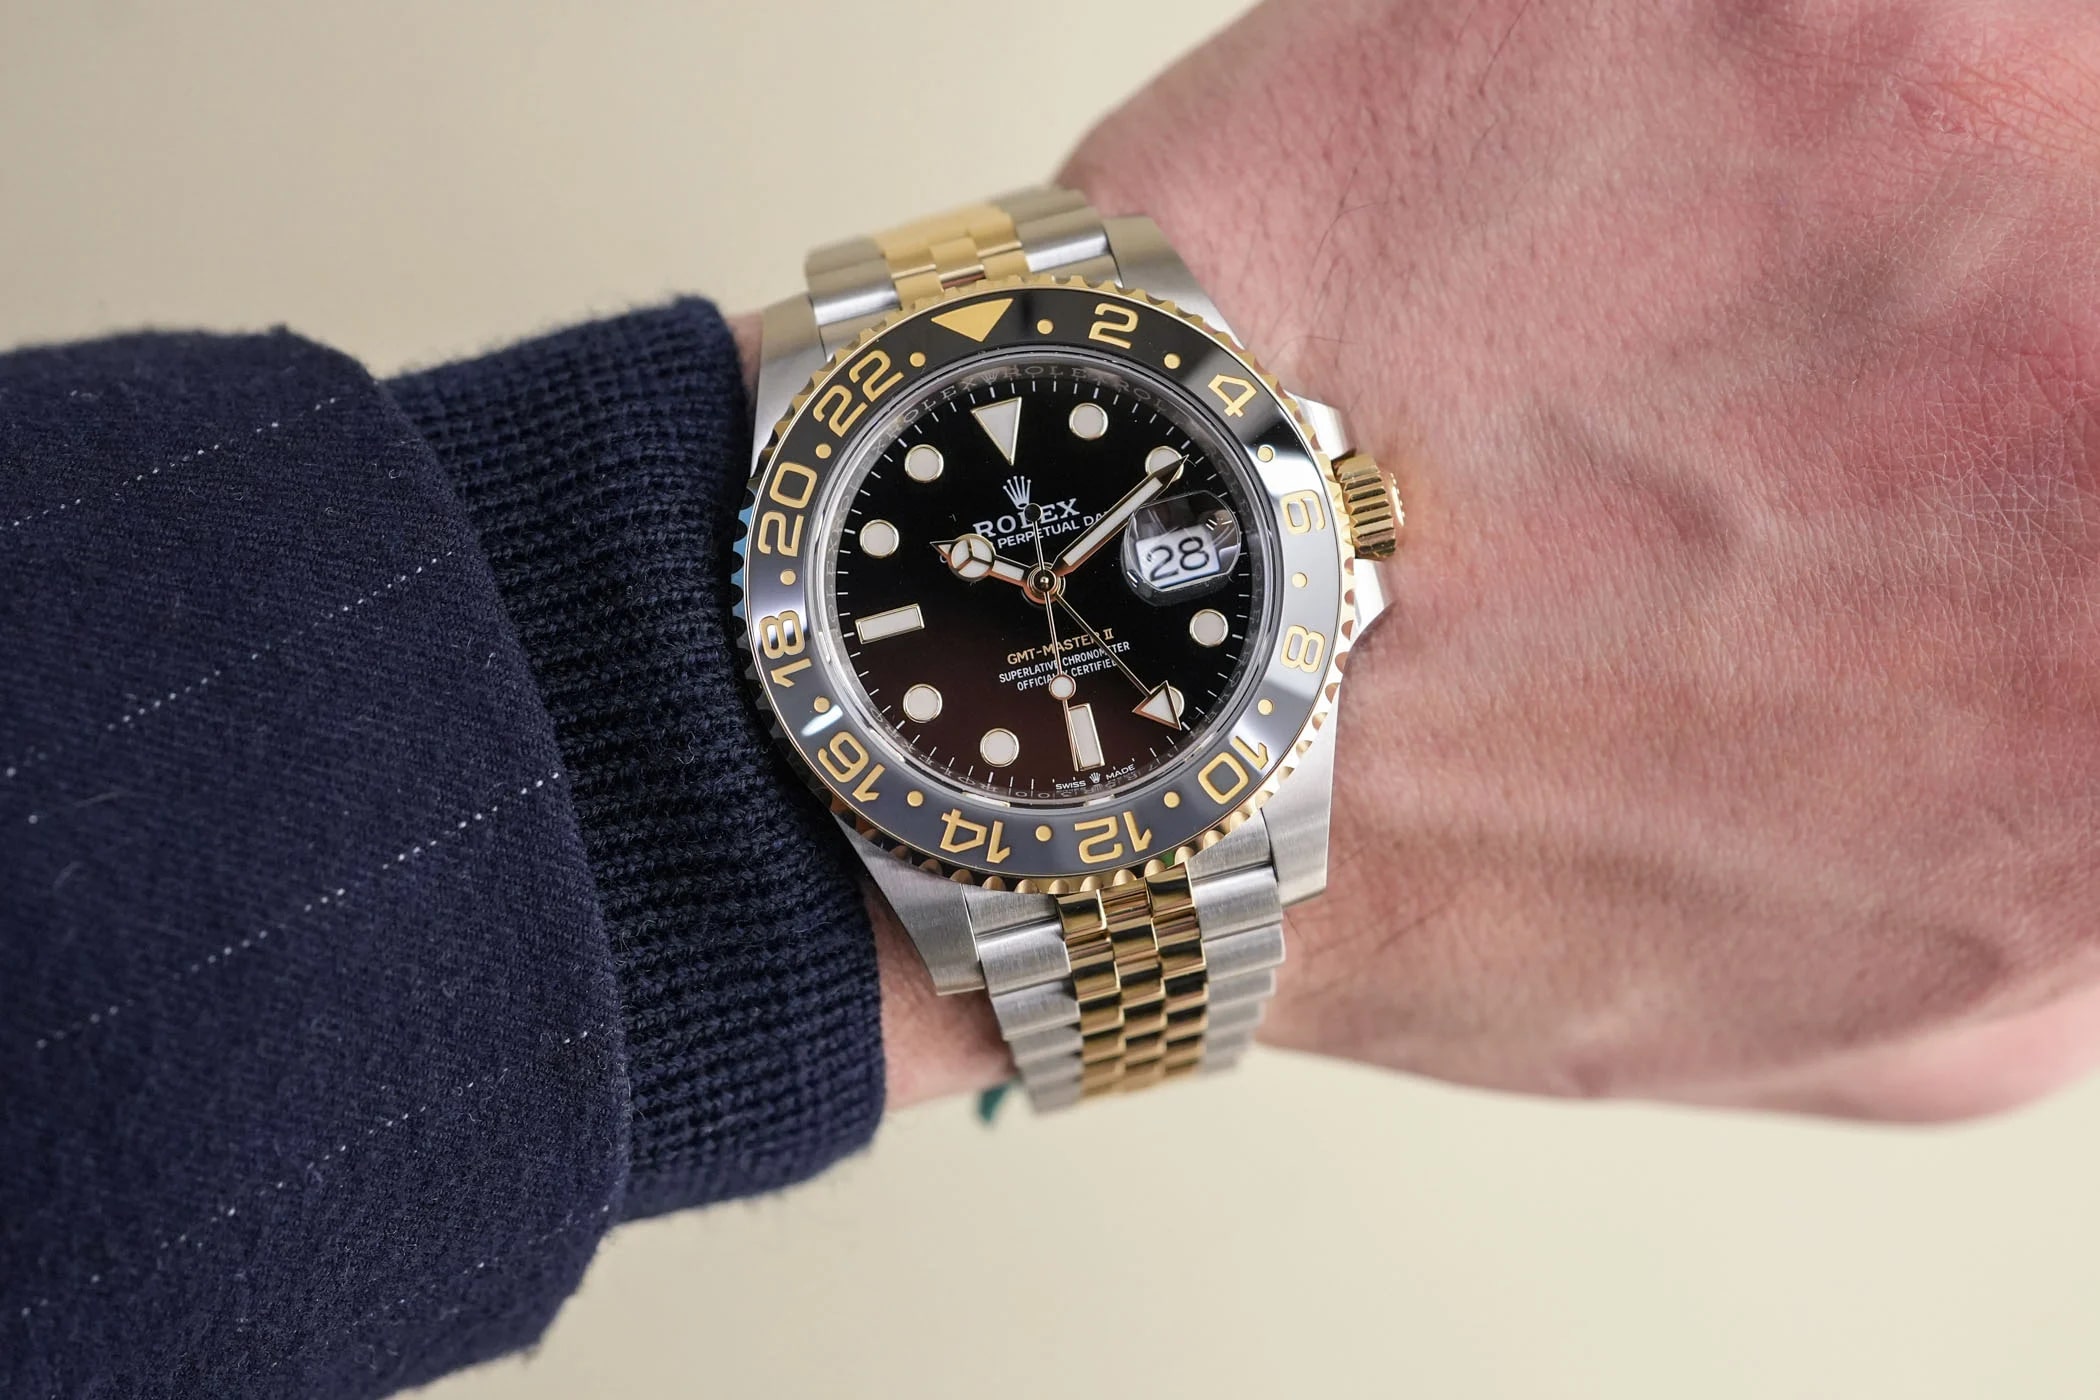 All-2023-Rolex-New-Models-Live-Photos-hands-on-New-2023-Rolex-GMT-Master-II-GRNR-Yellow-Gold-1.jpg